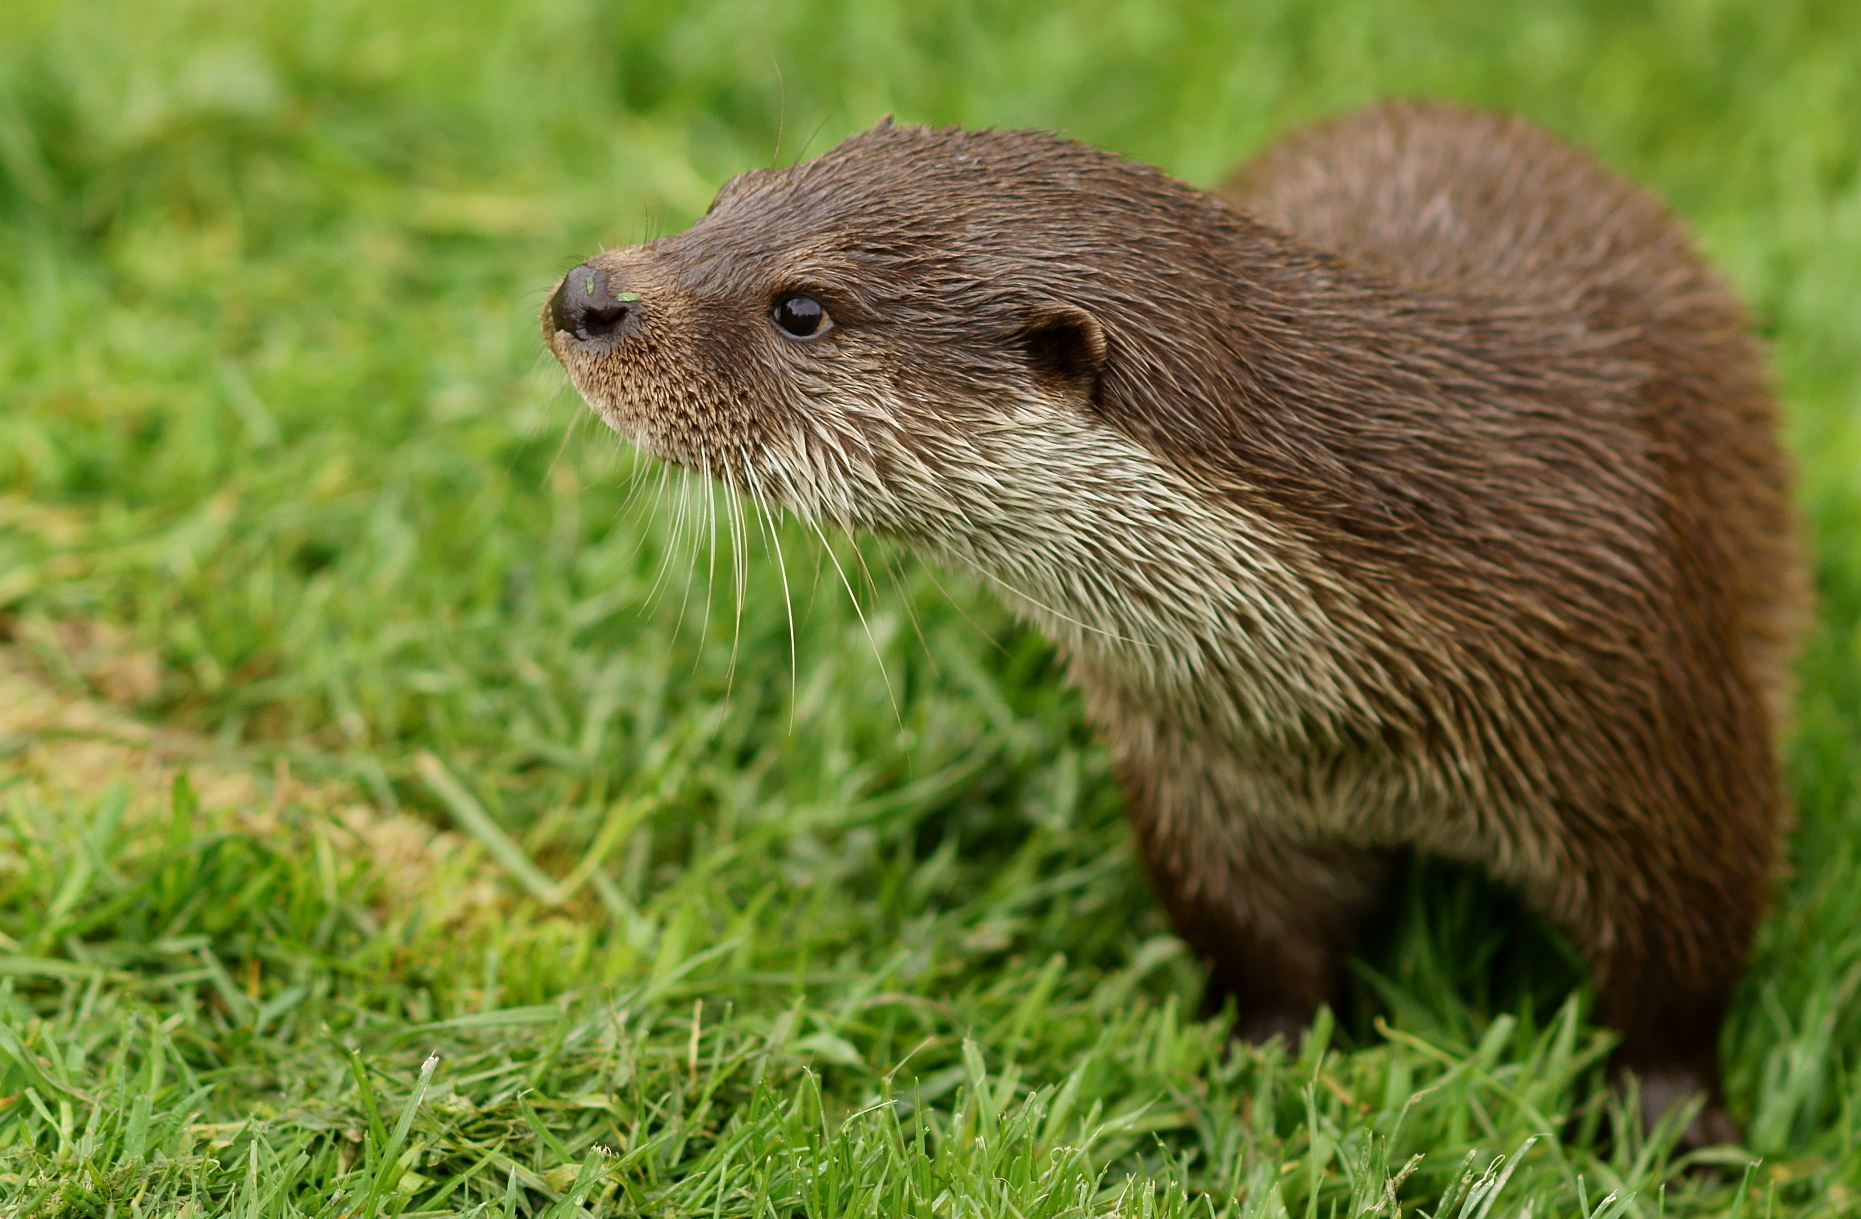 a wet animal is standing in the grass